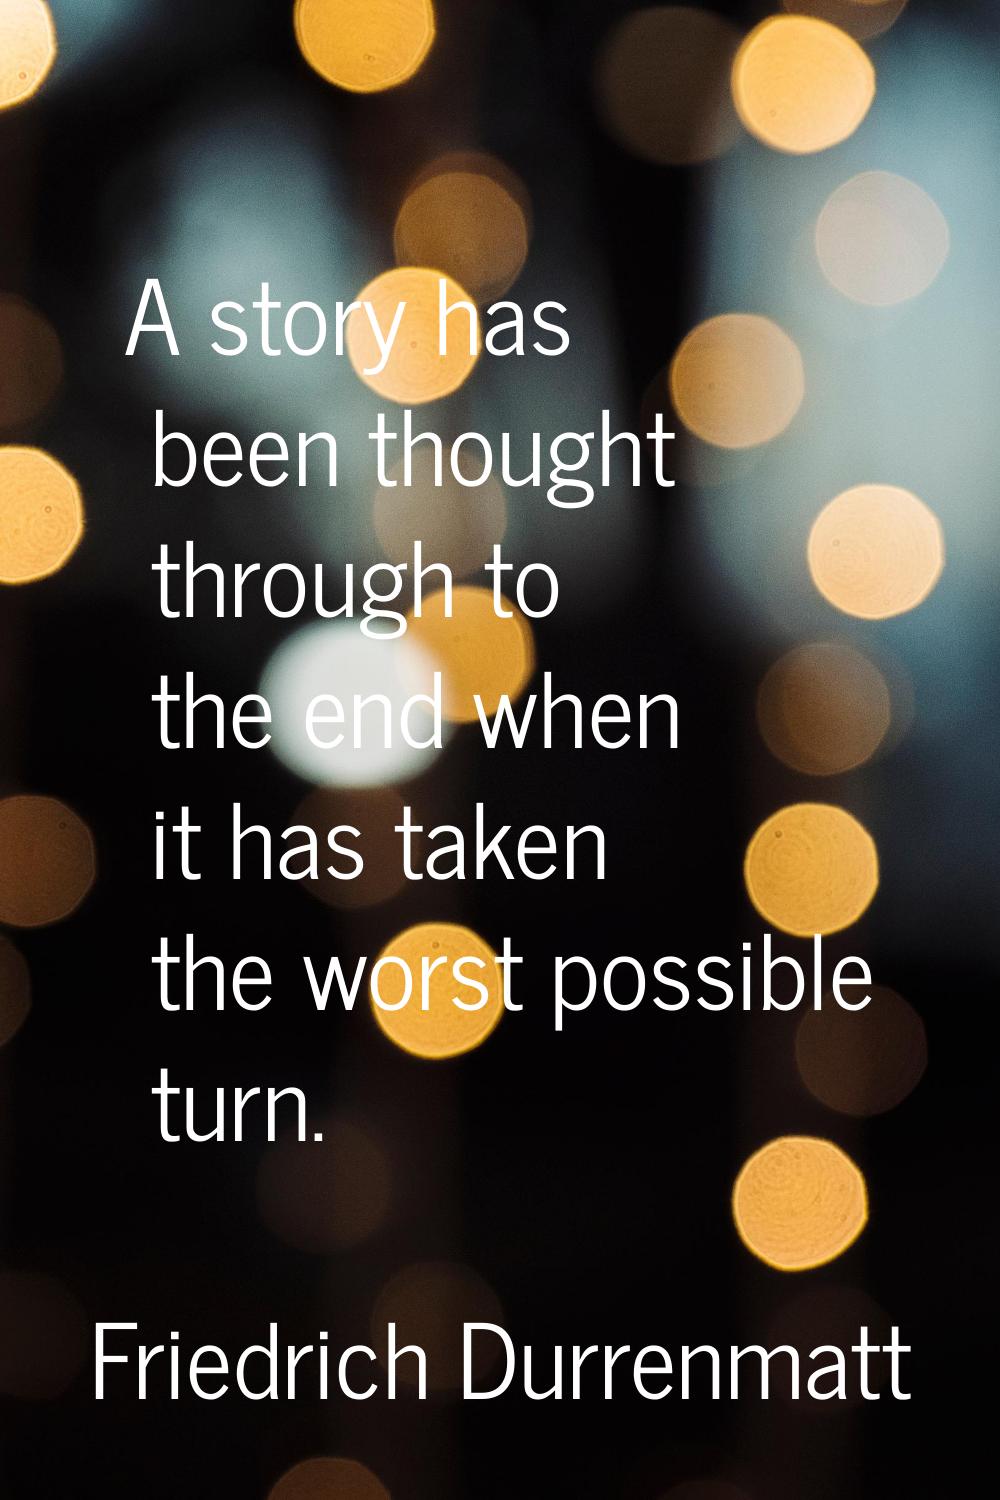 A story has been thought through to the end when it has taken the worst possible turn.